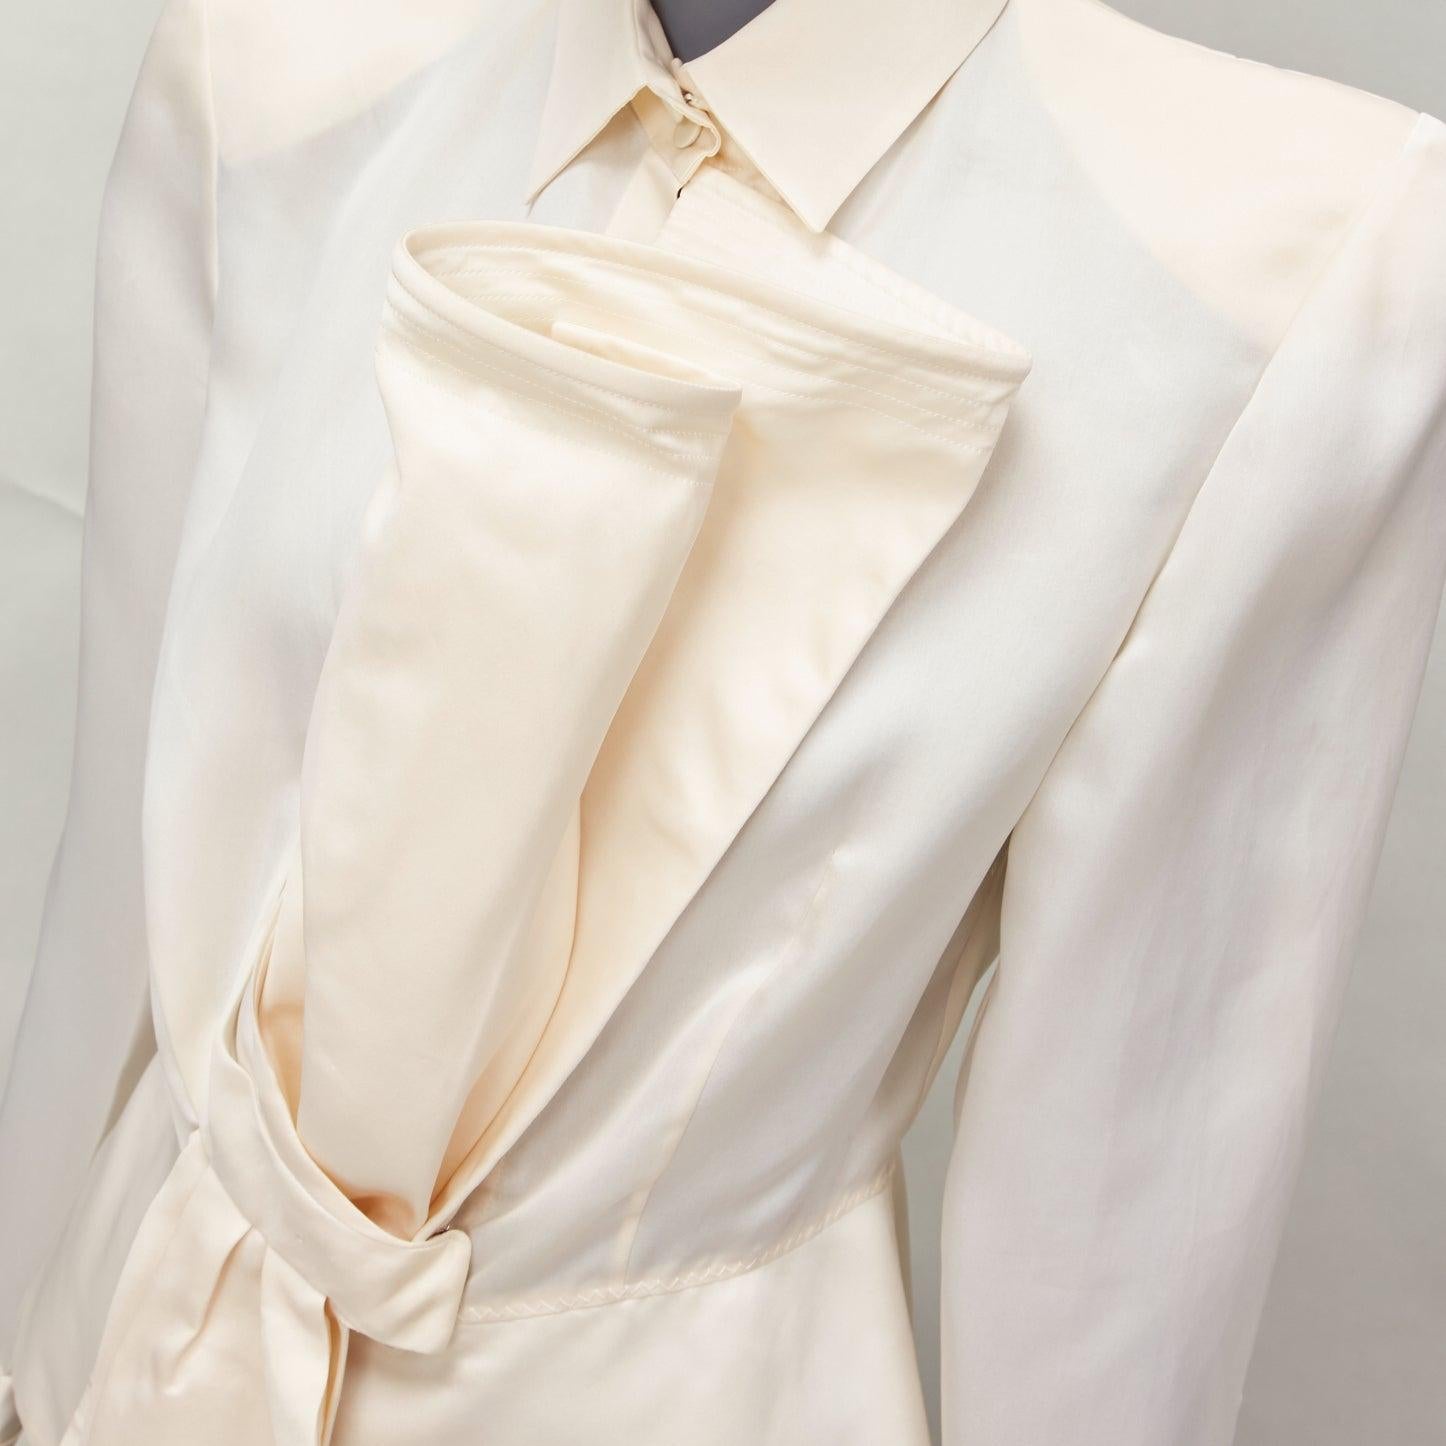 GIANFRANCO FERRE Vintage cream silk XL bow detail power shoulder jacket IT44 L
Reference: DYTG/A00015
Brand: Gianfranco Ferre
Designer: Gianfranco Ferre
Material: Silk
Color: Cream
Pattern: Solid
Closure: Snap Buttons
Extra Details: Padded power